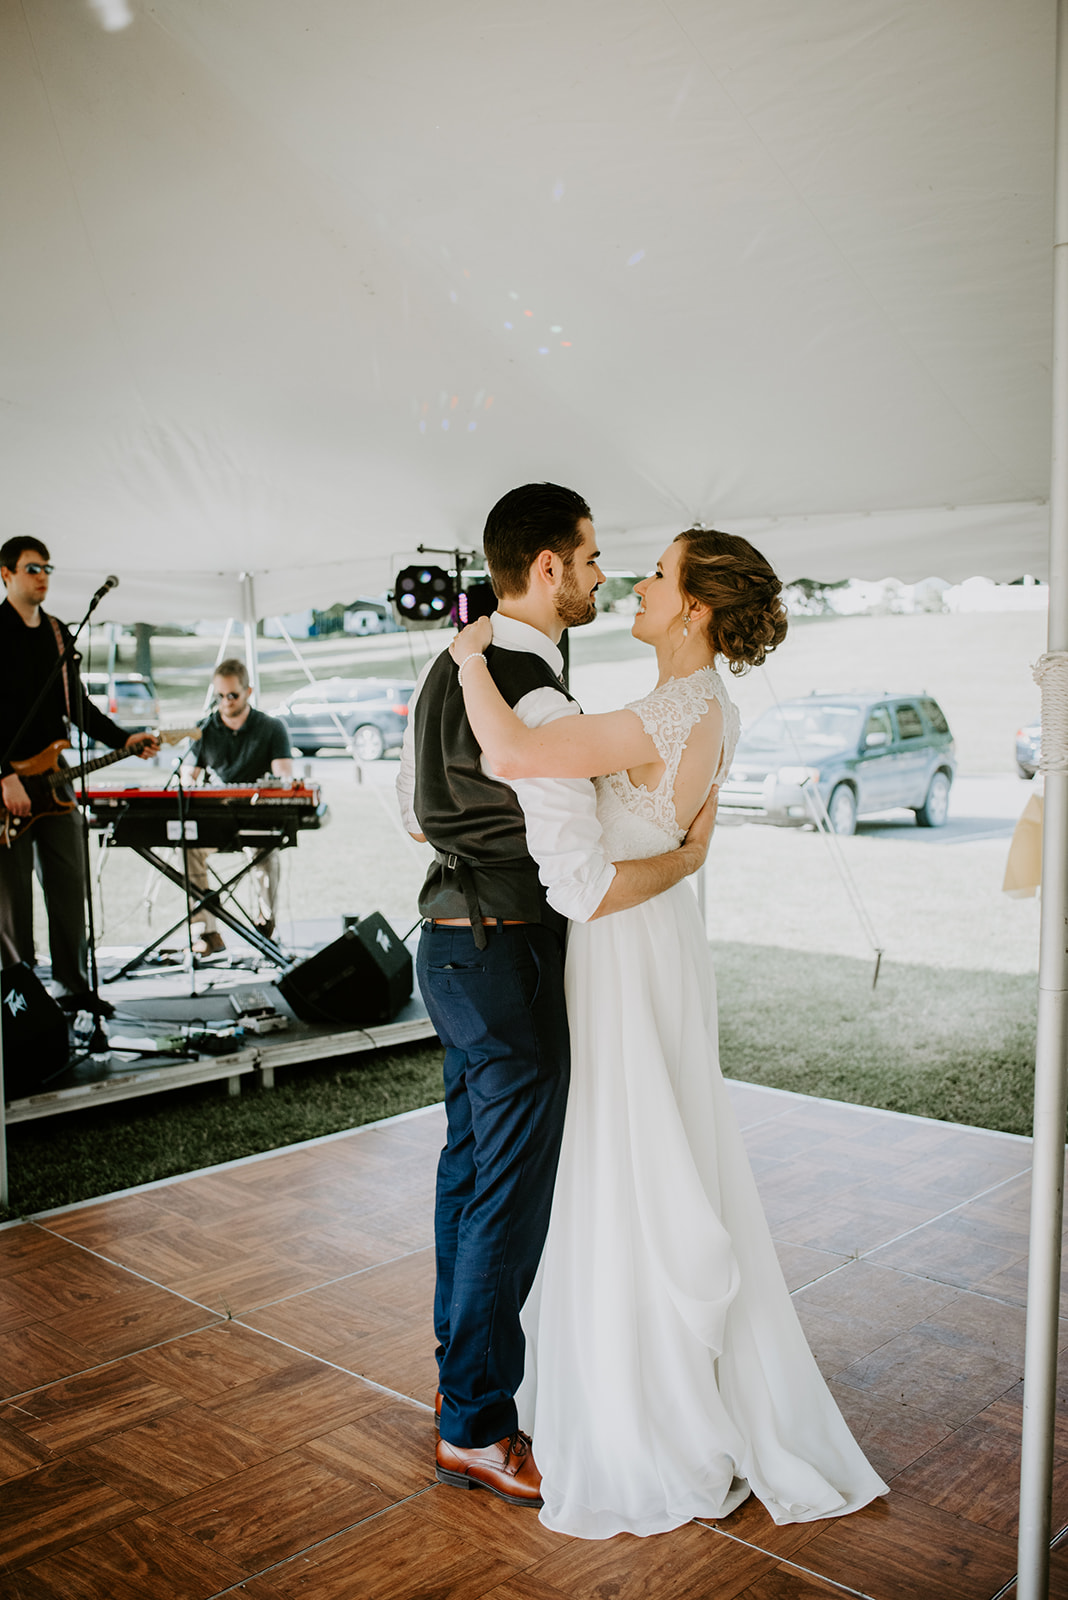 Liz and Dan share their first dance under a tent in Sparta Michigan to a live band